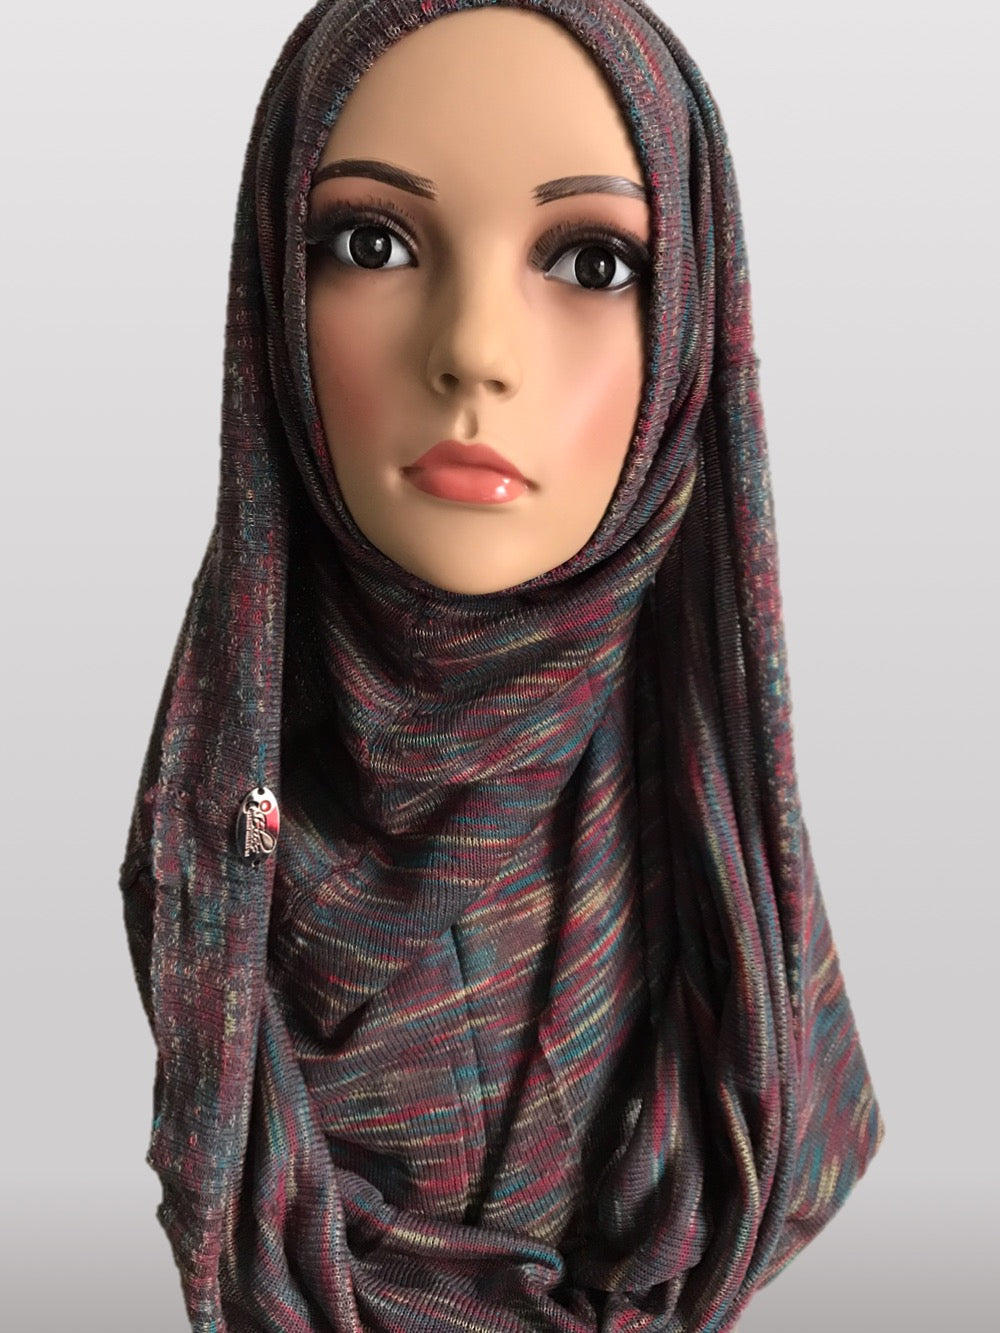 Hooded knitted instant hijab grey green lines